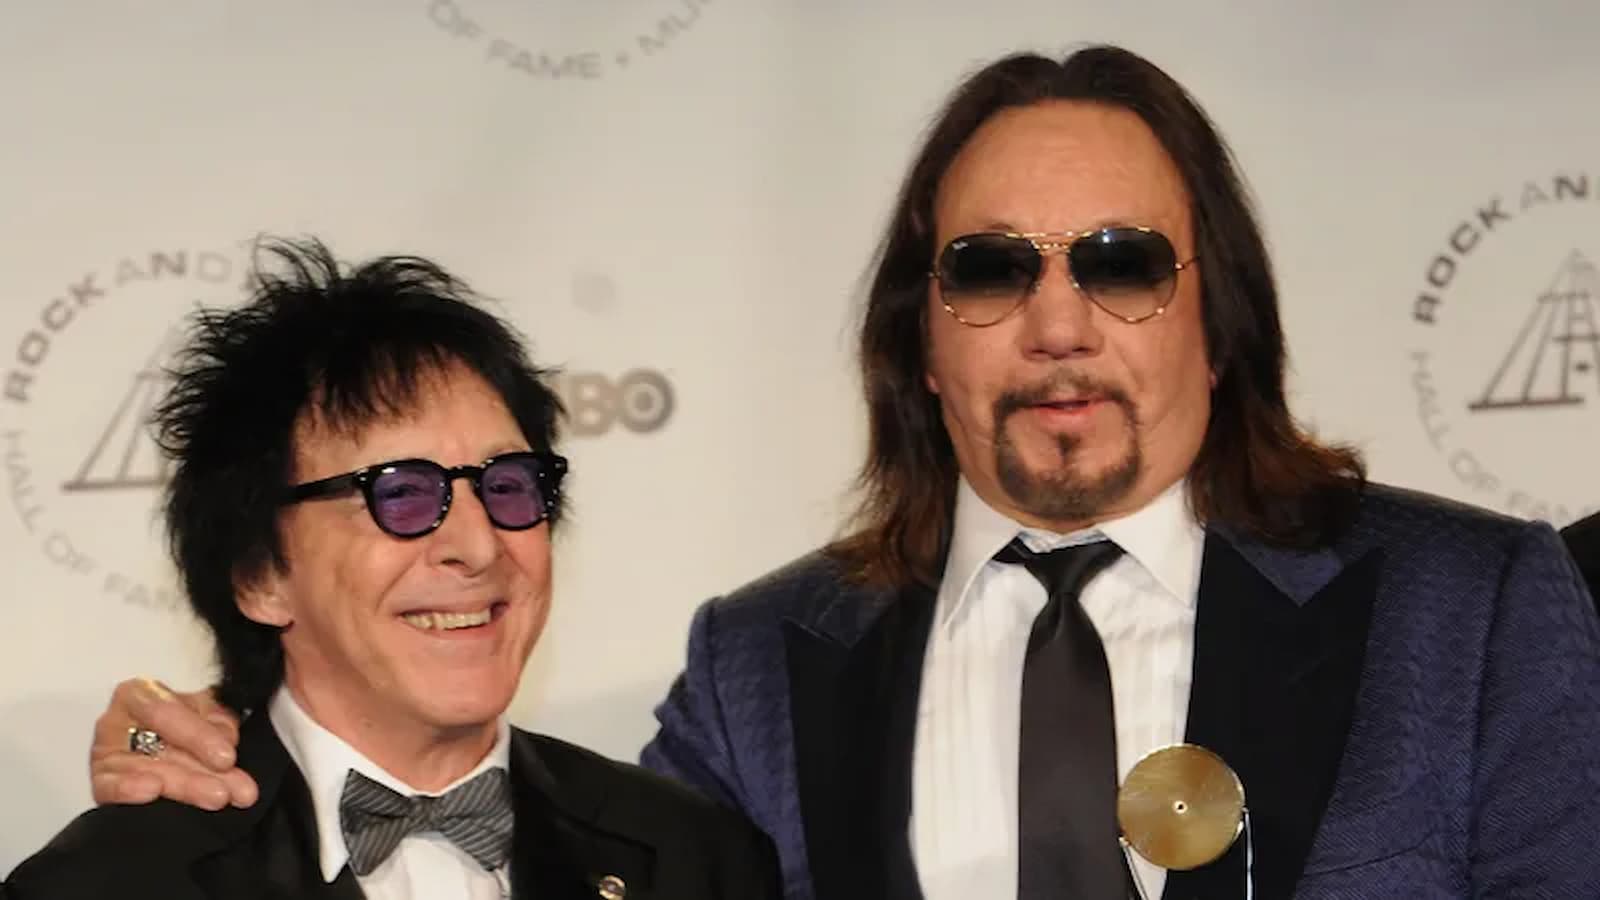 Peter Criss Biography: Age, Height, Birthday, Career, Family, Personal Life, Net Worth